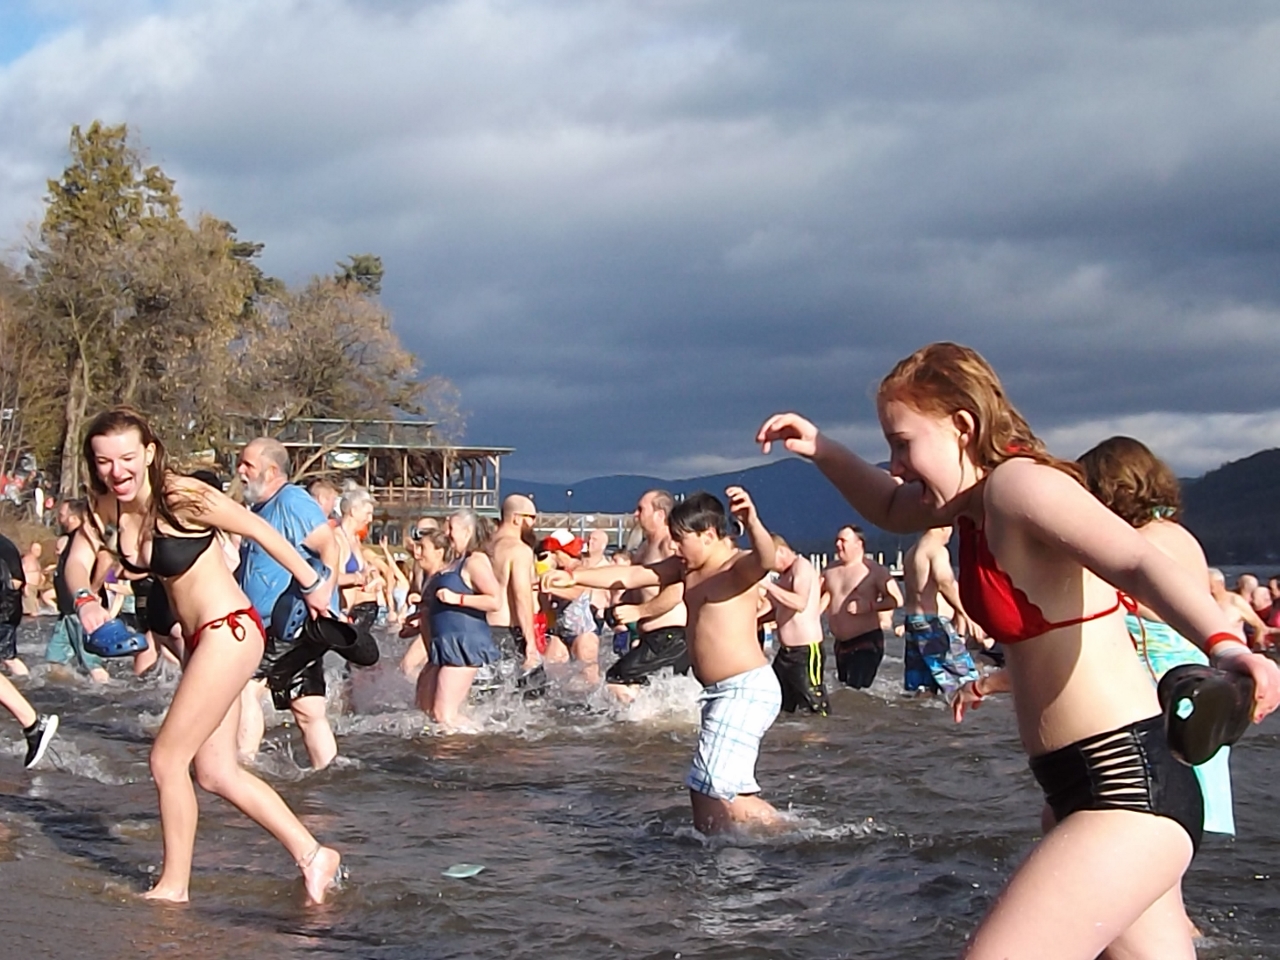 Photos: Nearly 800 begin 2019 with a plunge into Lake George - The Lake  George Examiner